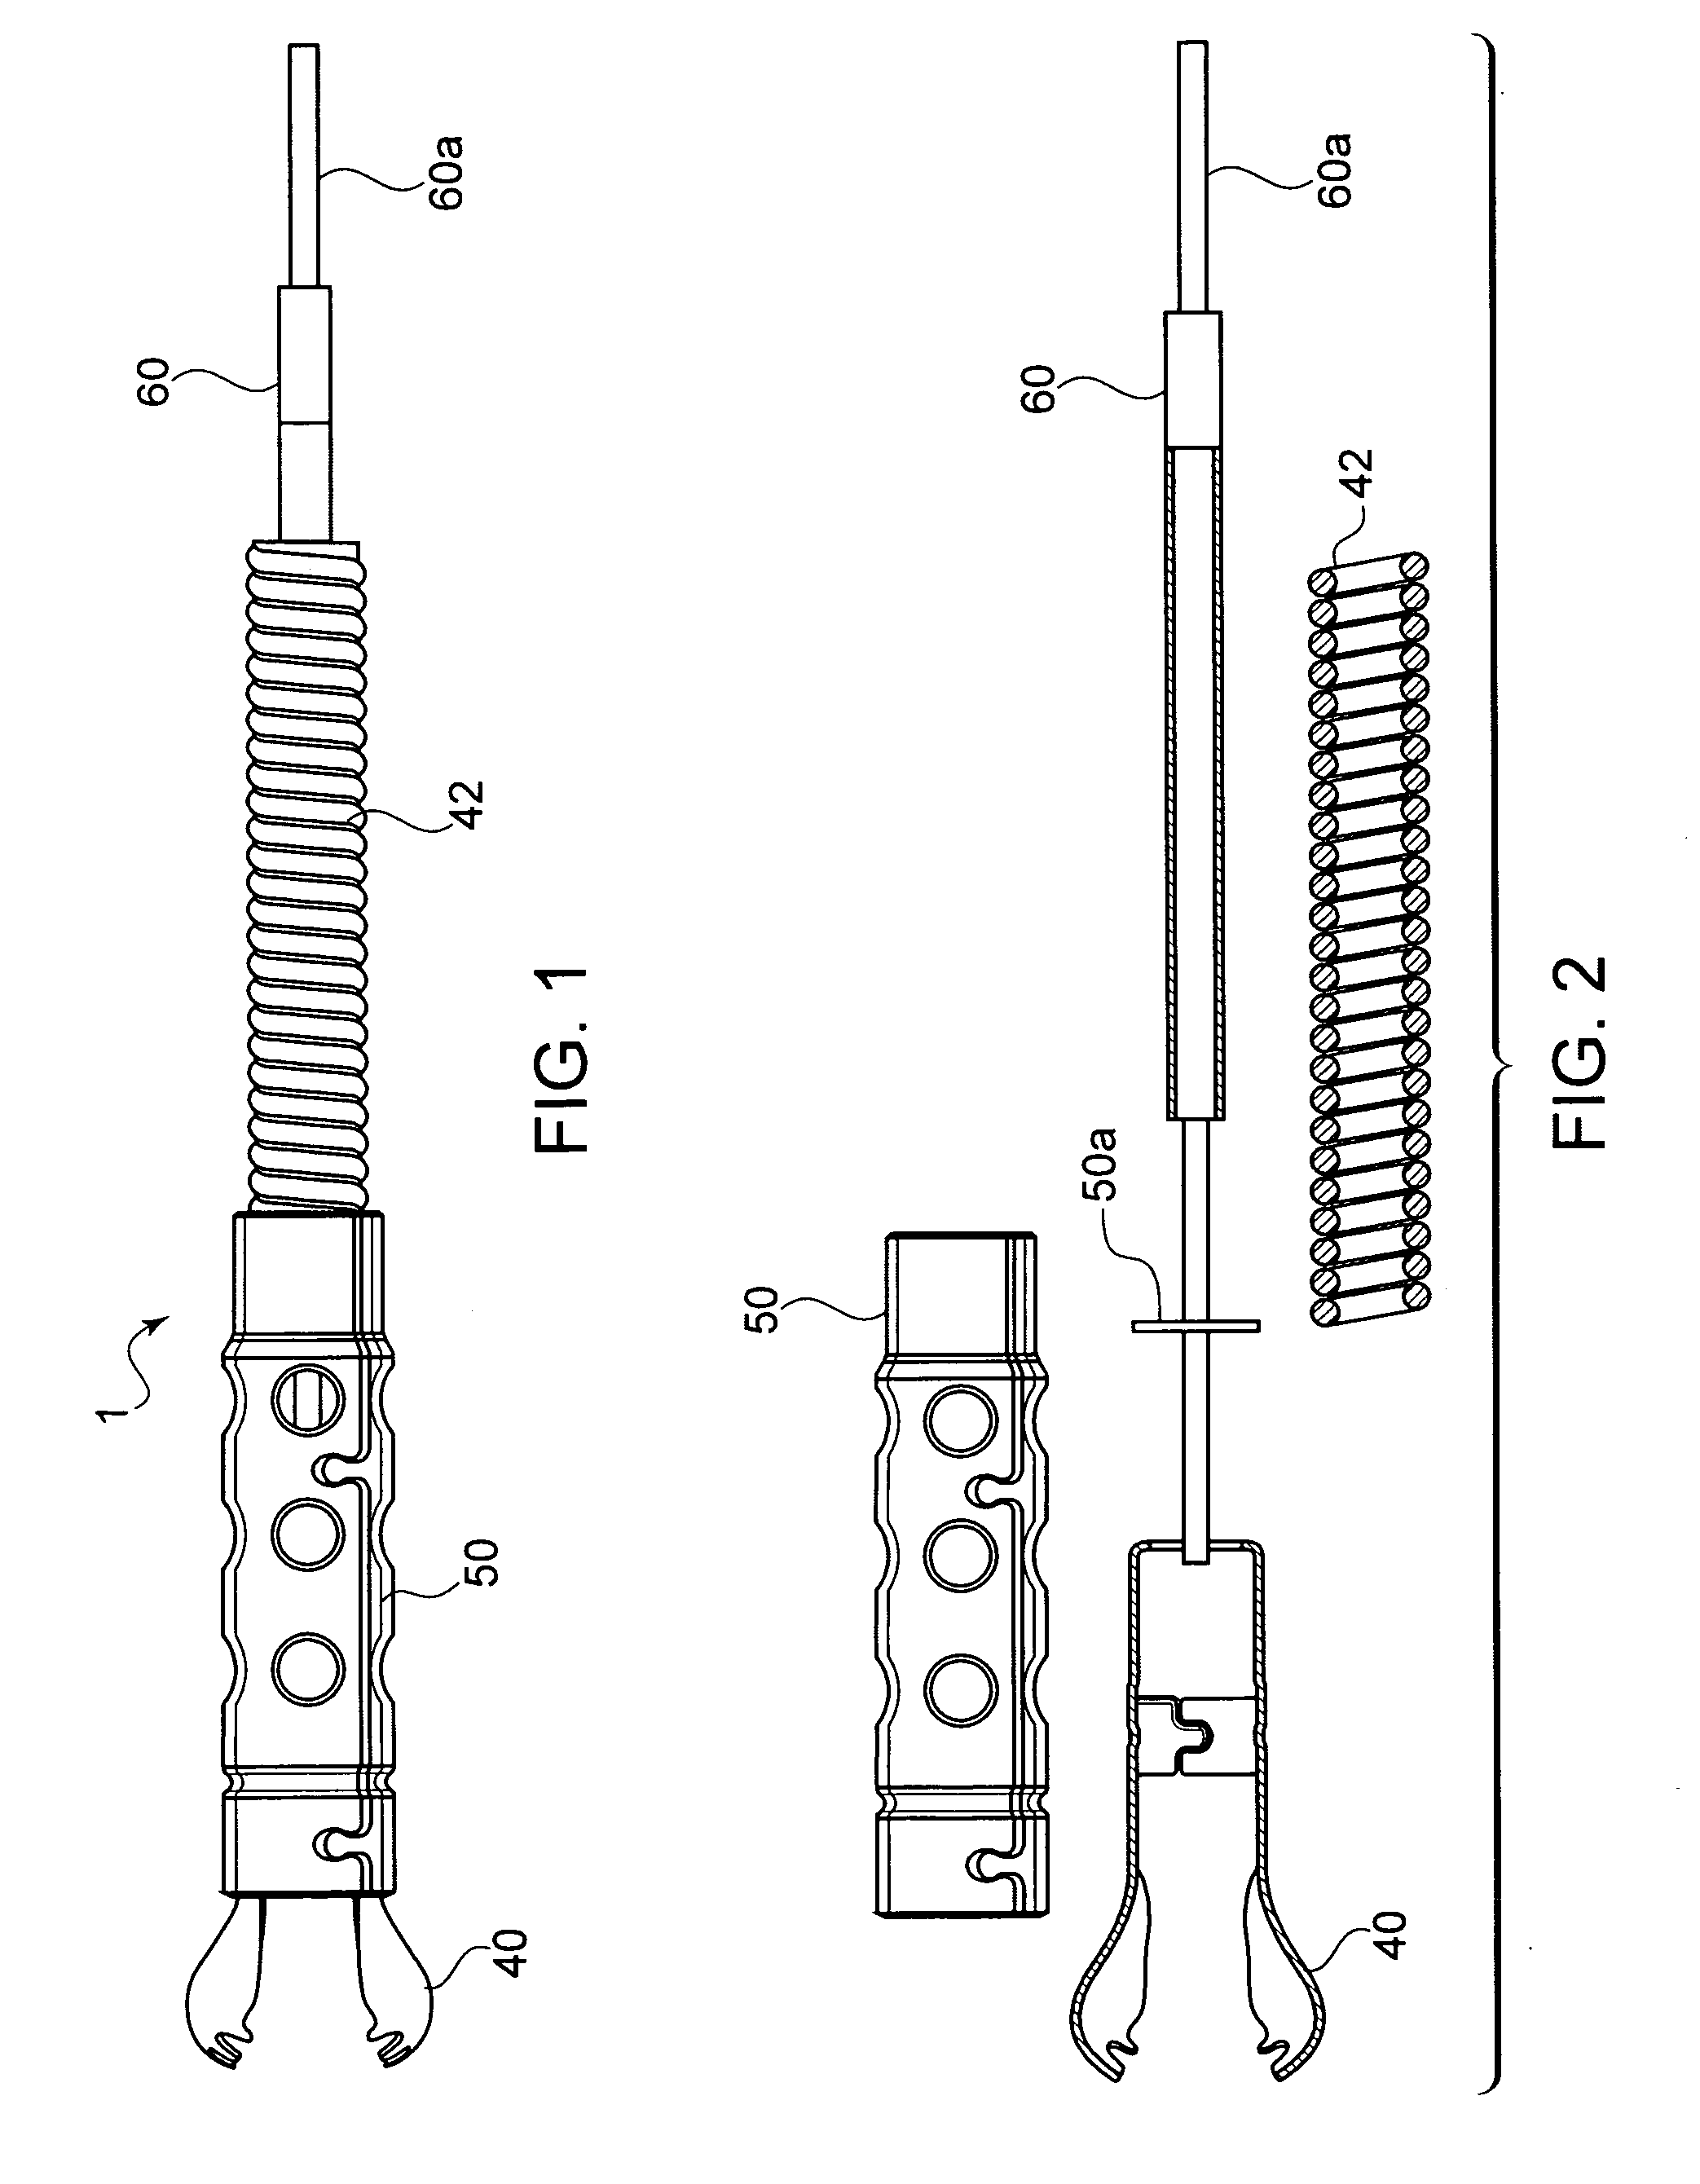 Automated actuator for spring based multiple purpose medical instruments